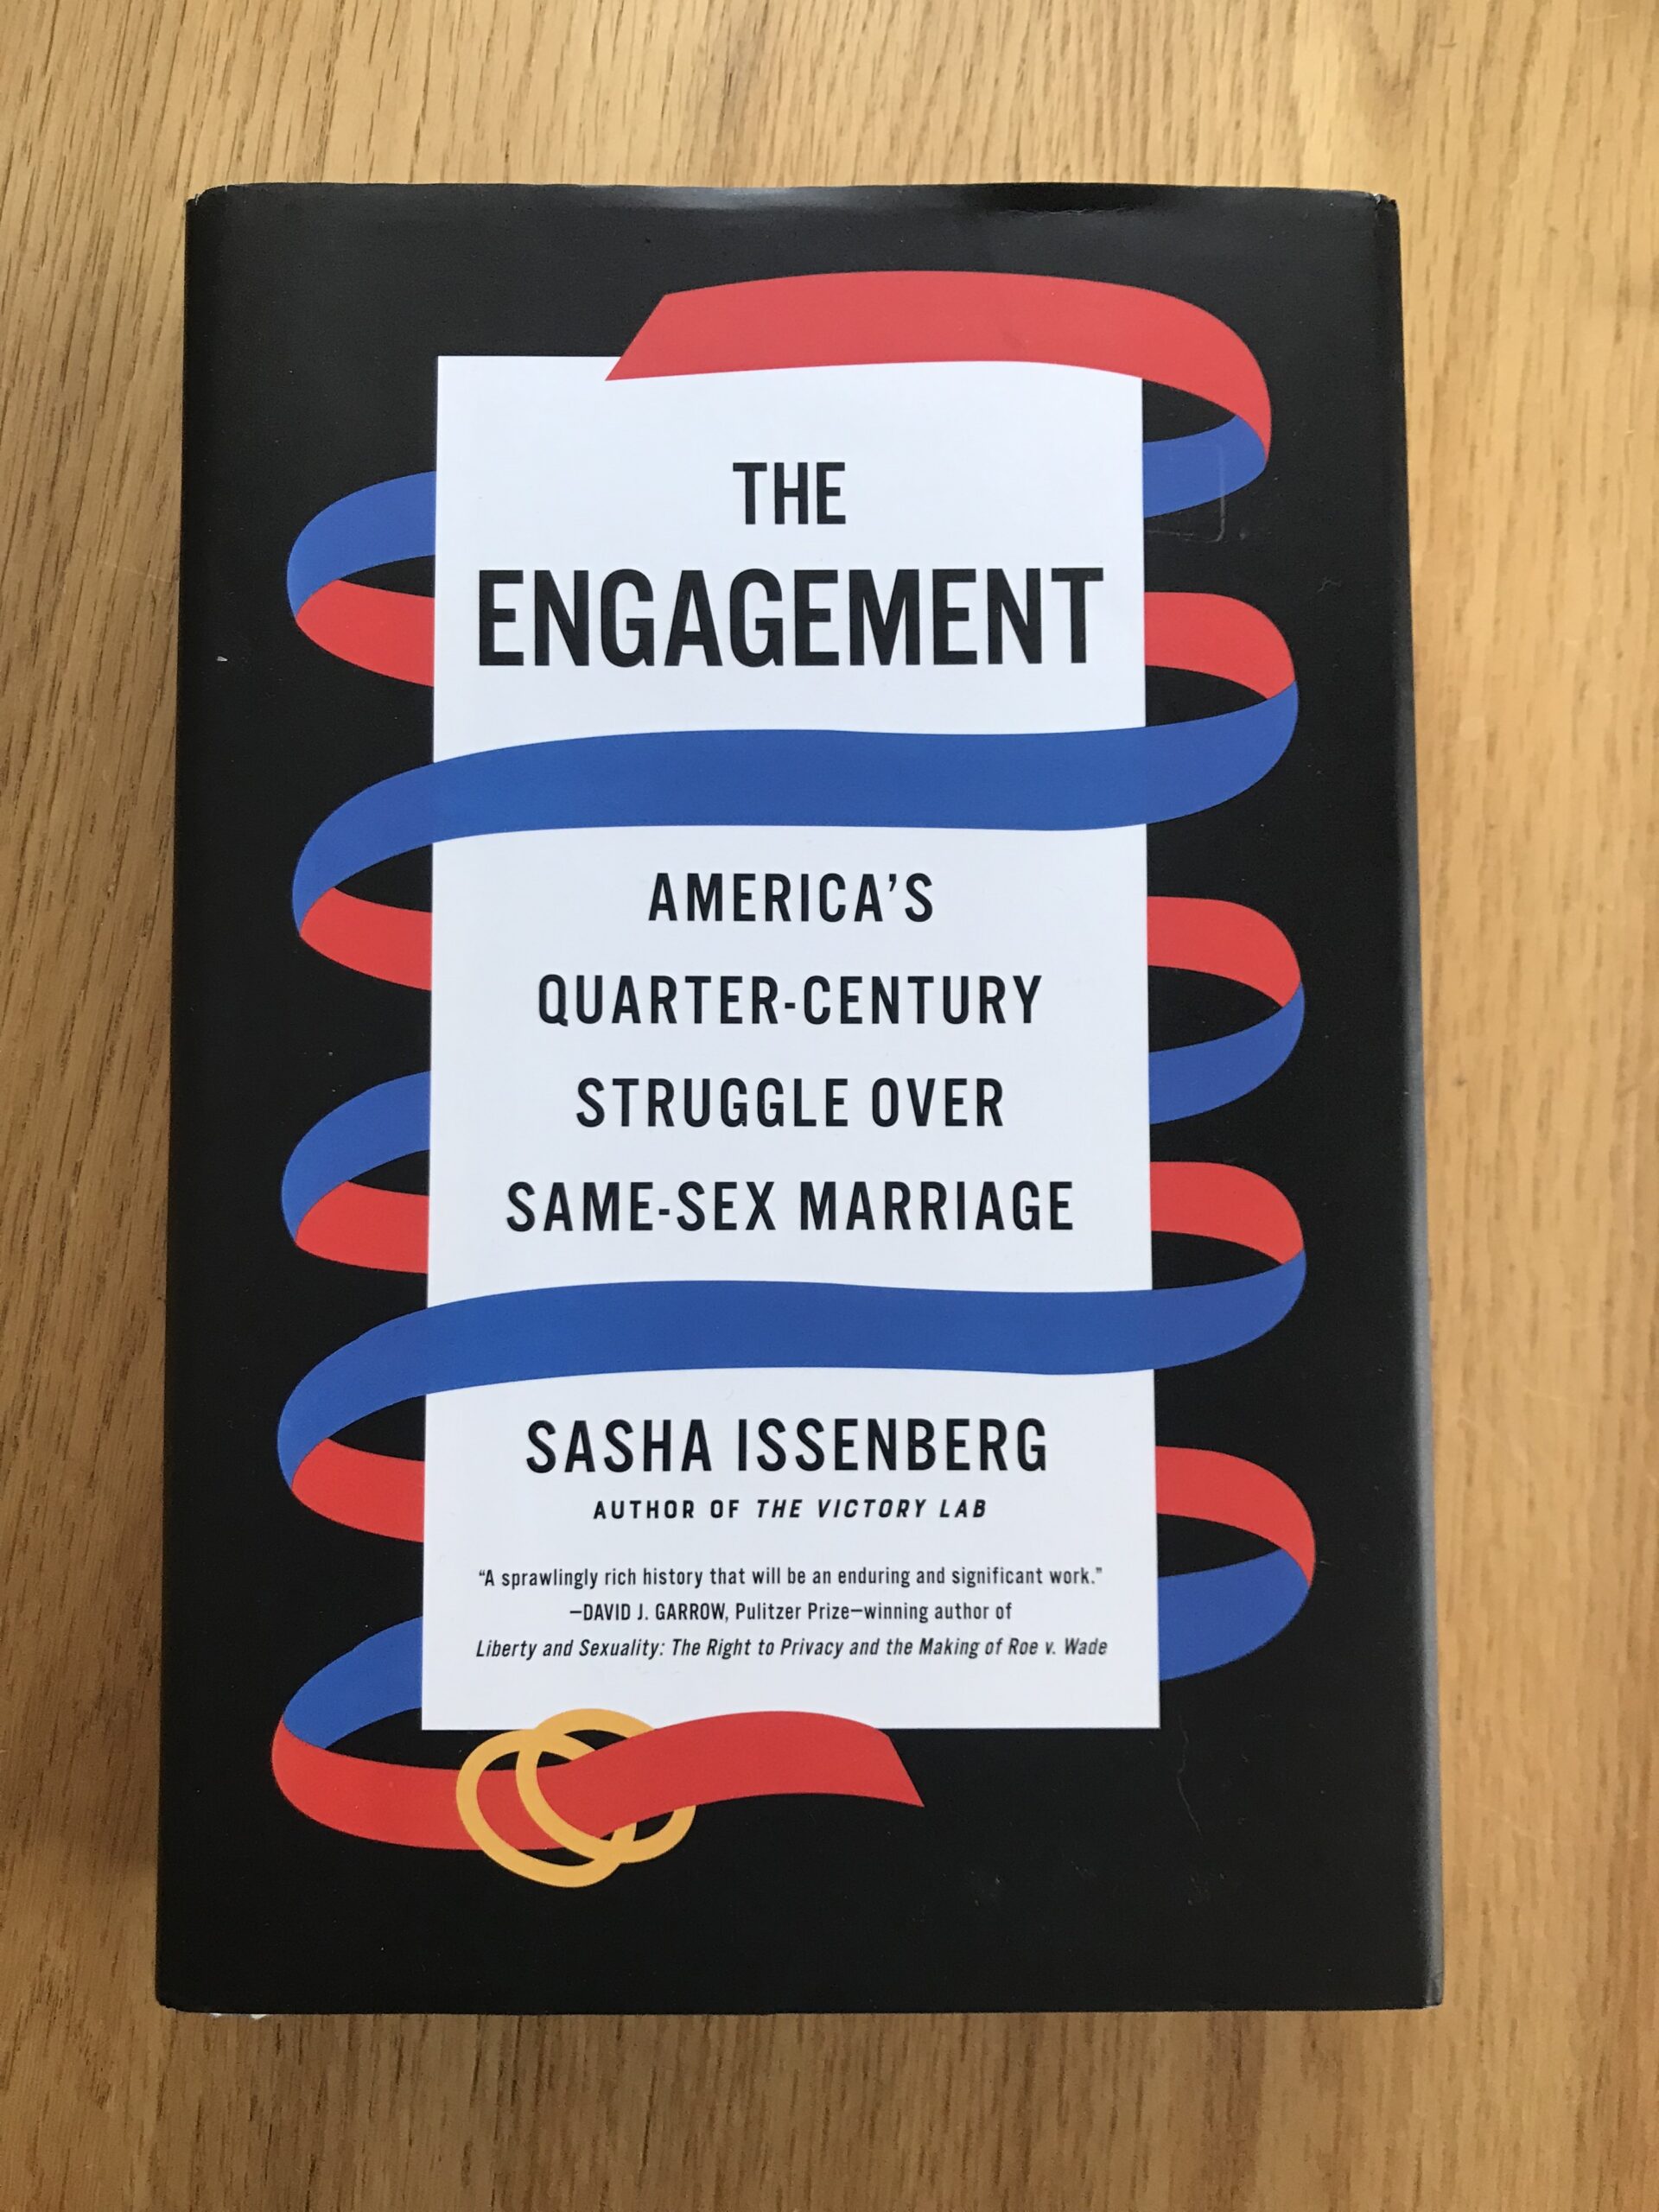 The Engagement – 10 lessons from the US campaign for same-sex marriage